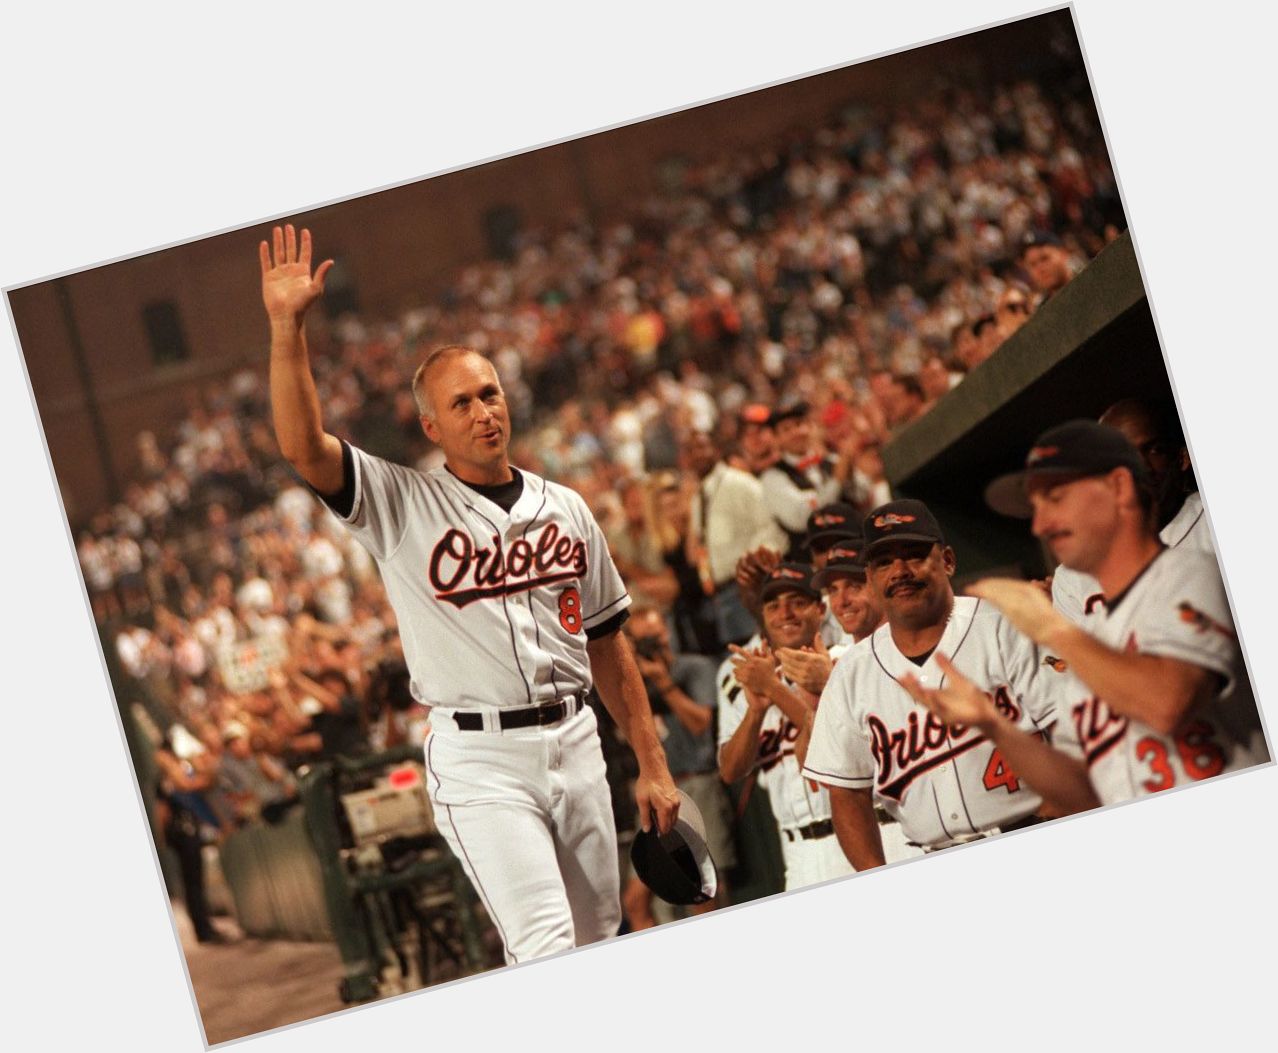 Happy \80s Birthday to Cal Ripken Jr., who turns 57 today. One of my favorites. 